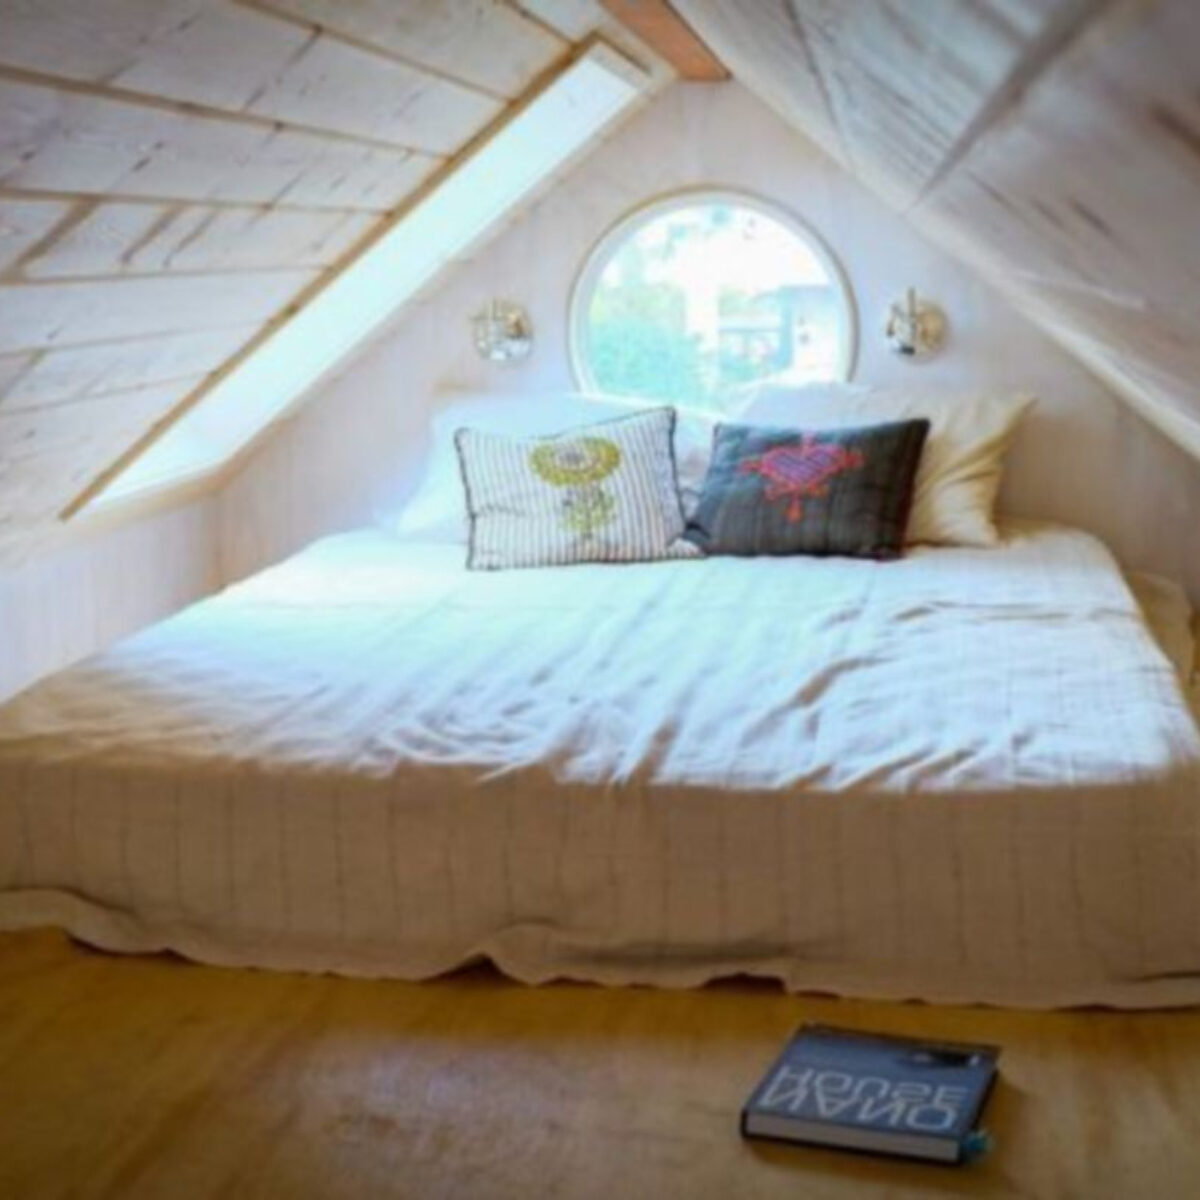 45 Amazing Attic Bedroom Ideas On A Budget With Images